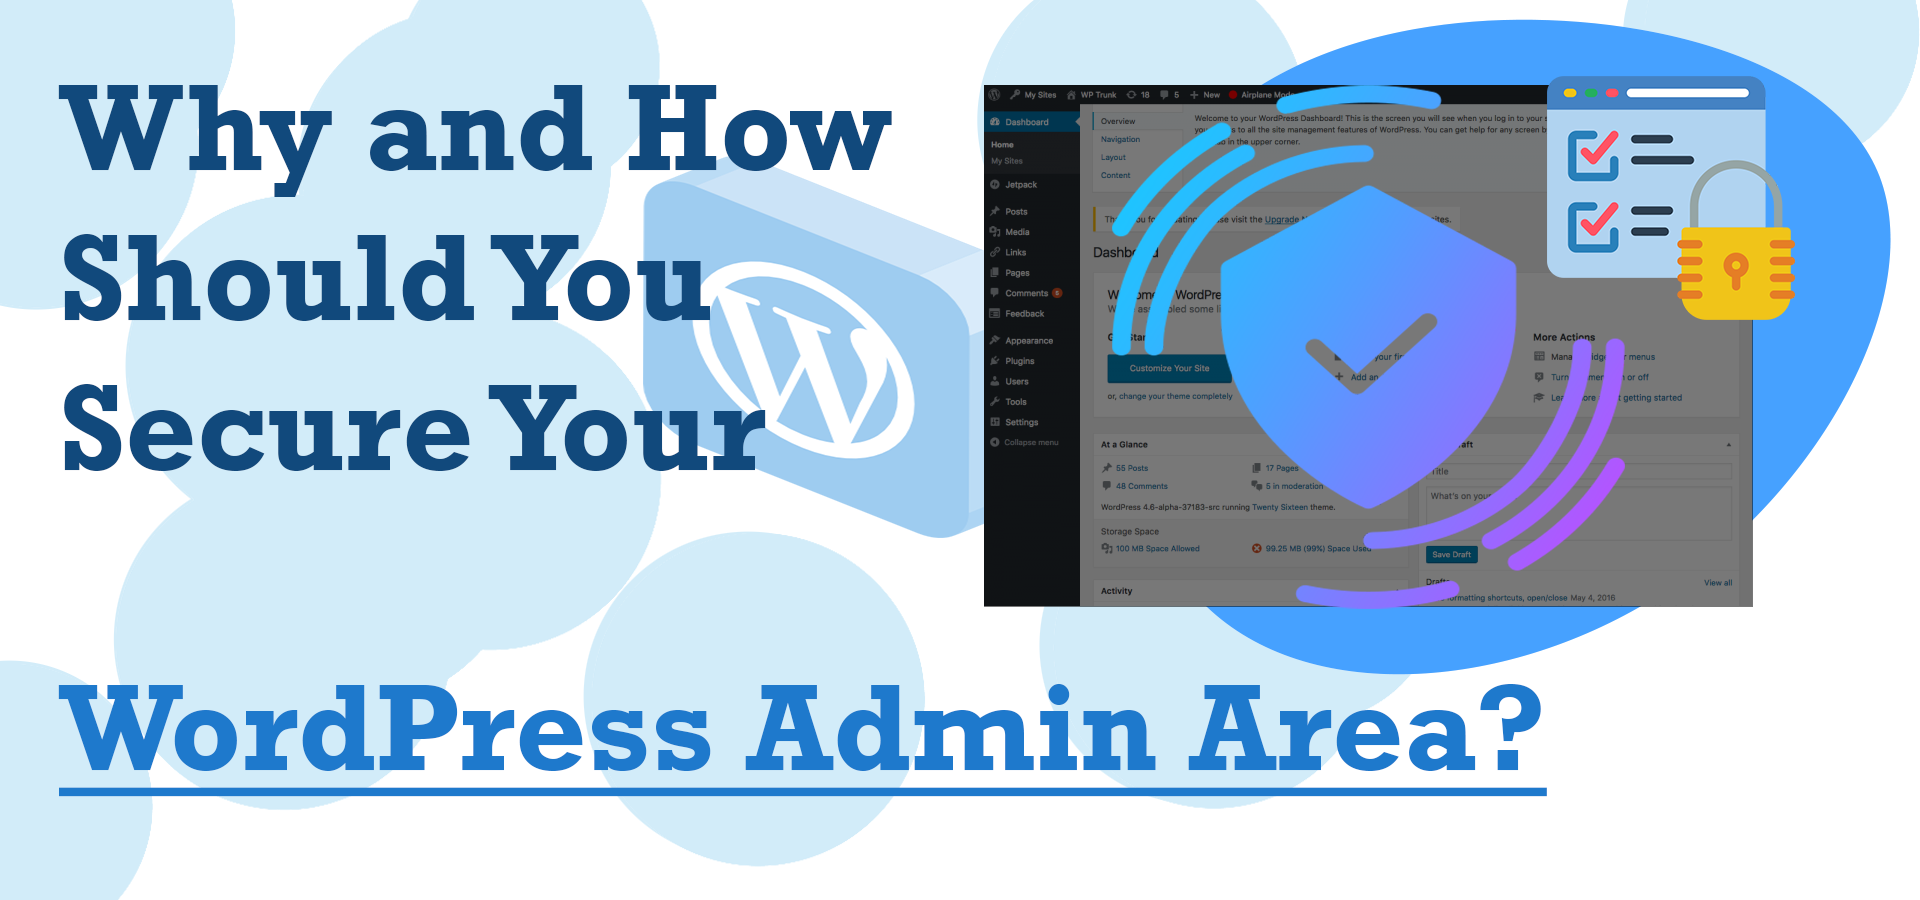 Why and How Should You Secure Your WordPress Admin Area